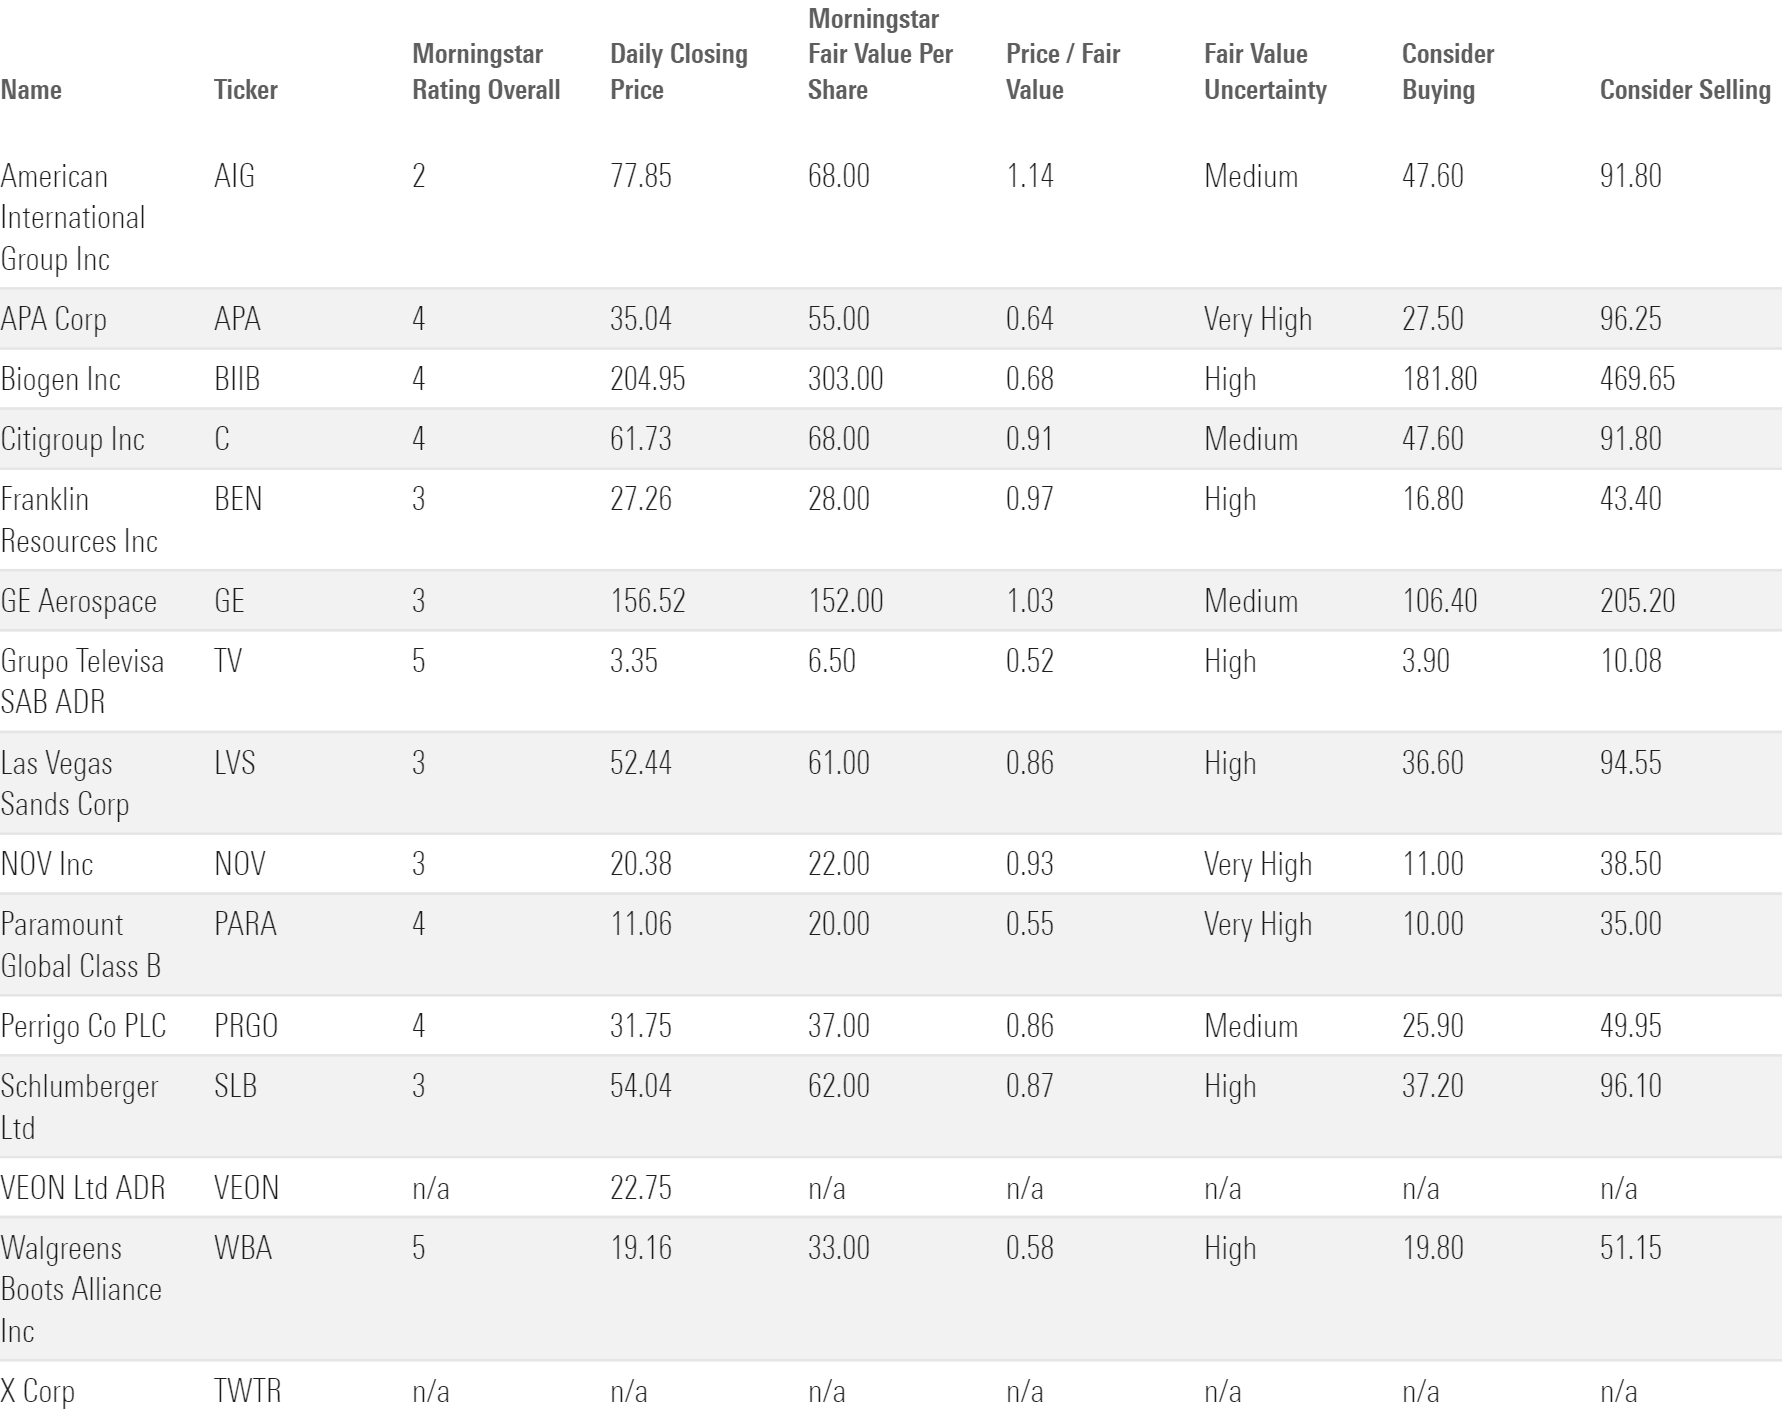 A table showing Morningstar Analyst Ratings and valuation measures for 15 stocks.